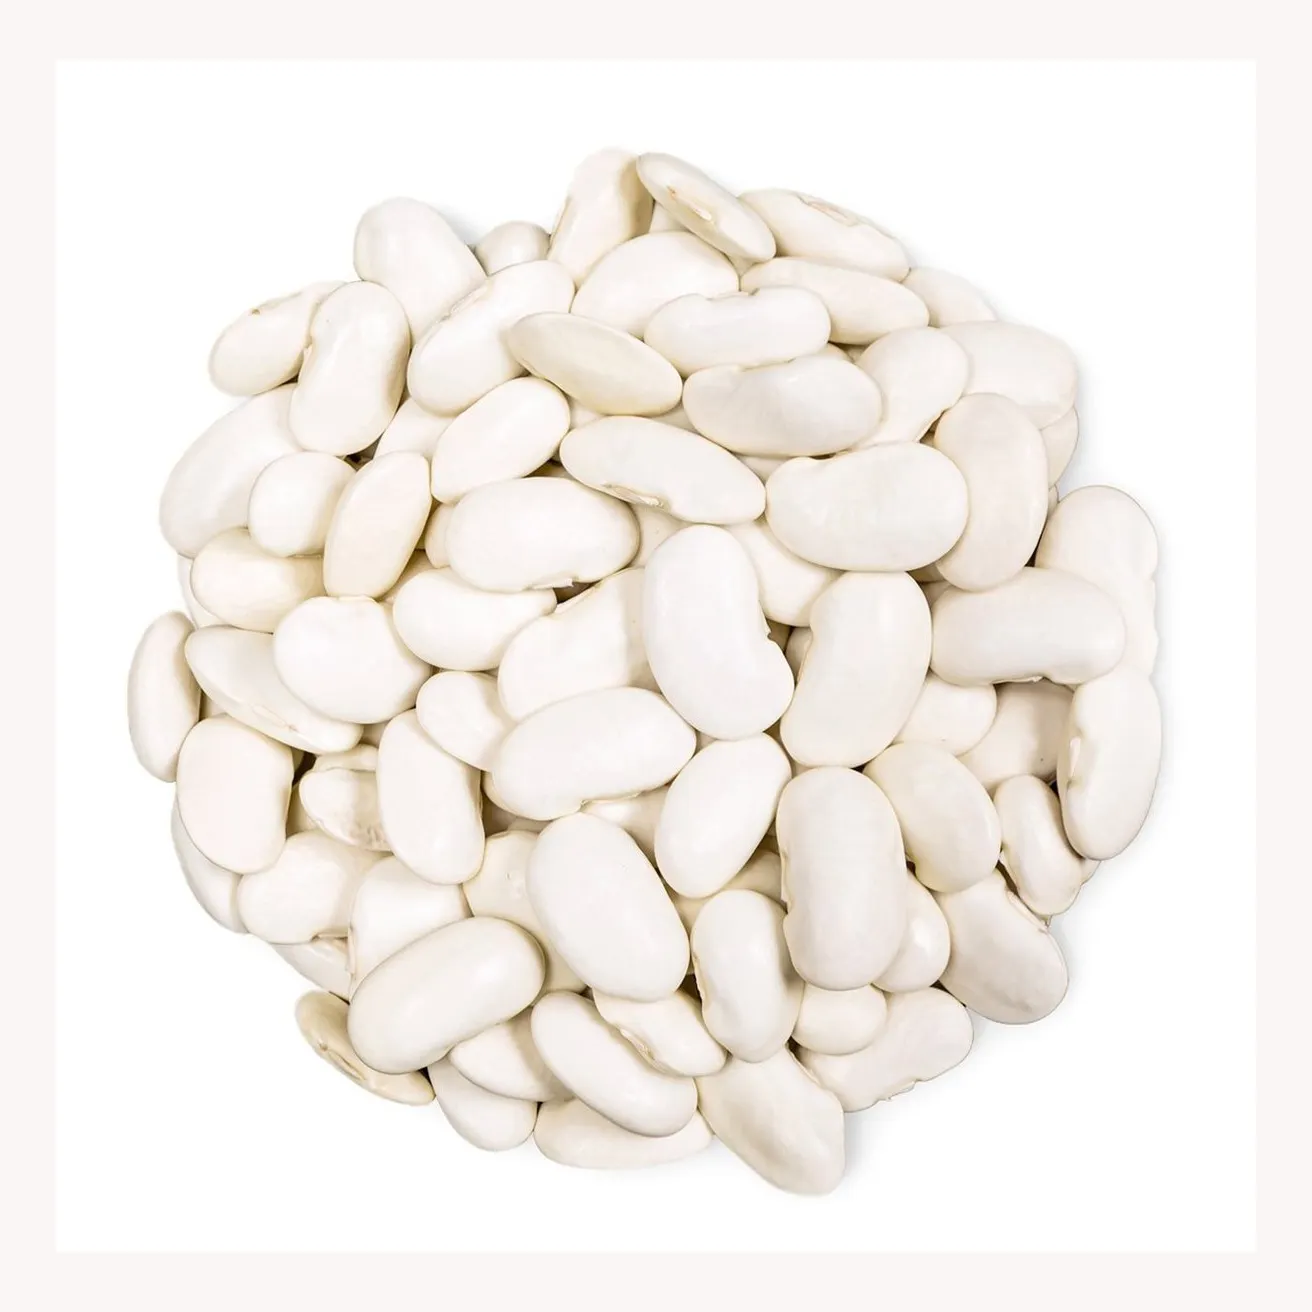 Wholesale Supplier Best Quality white kidney Beans For Sale In Cheap Price